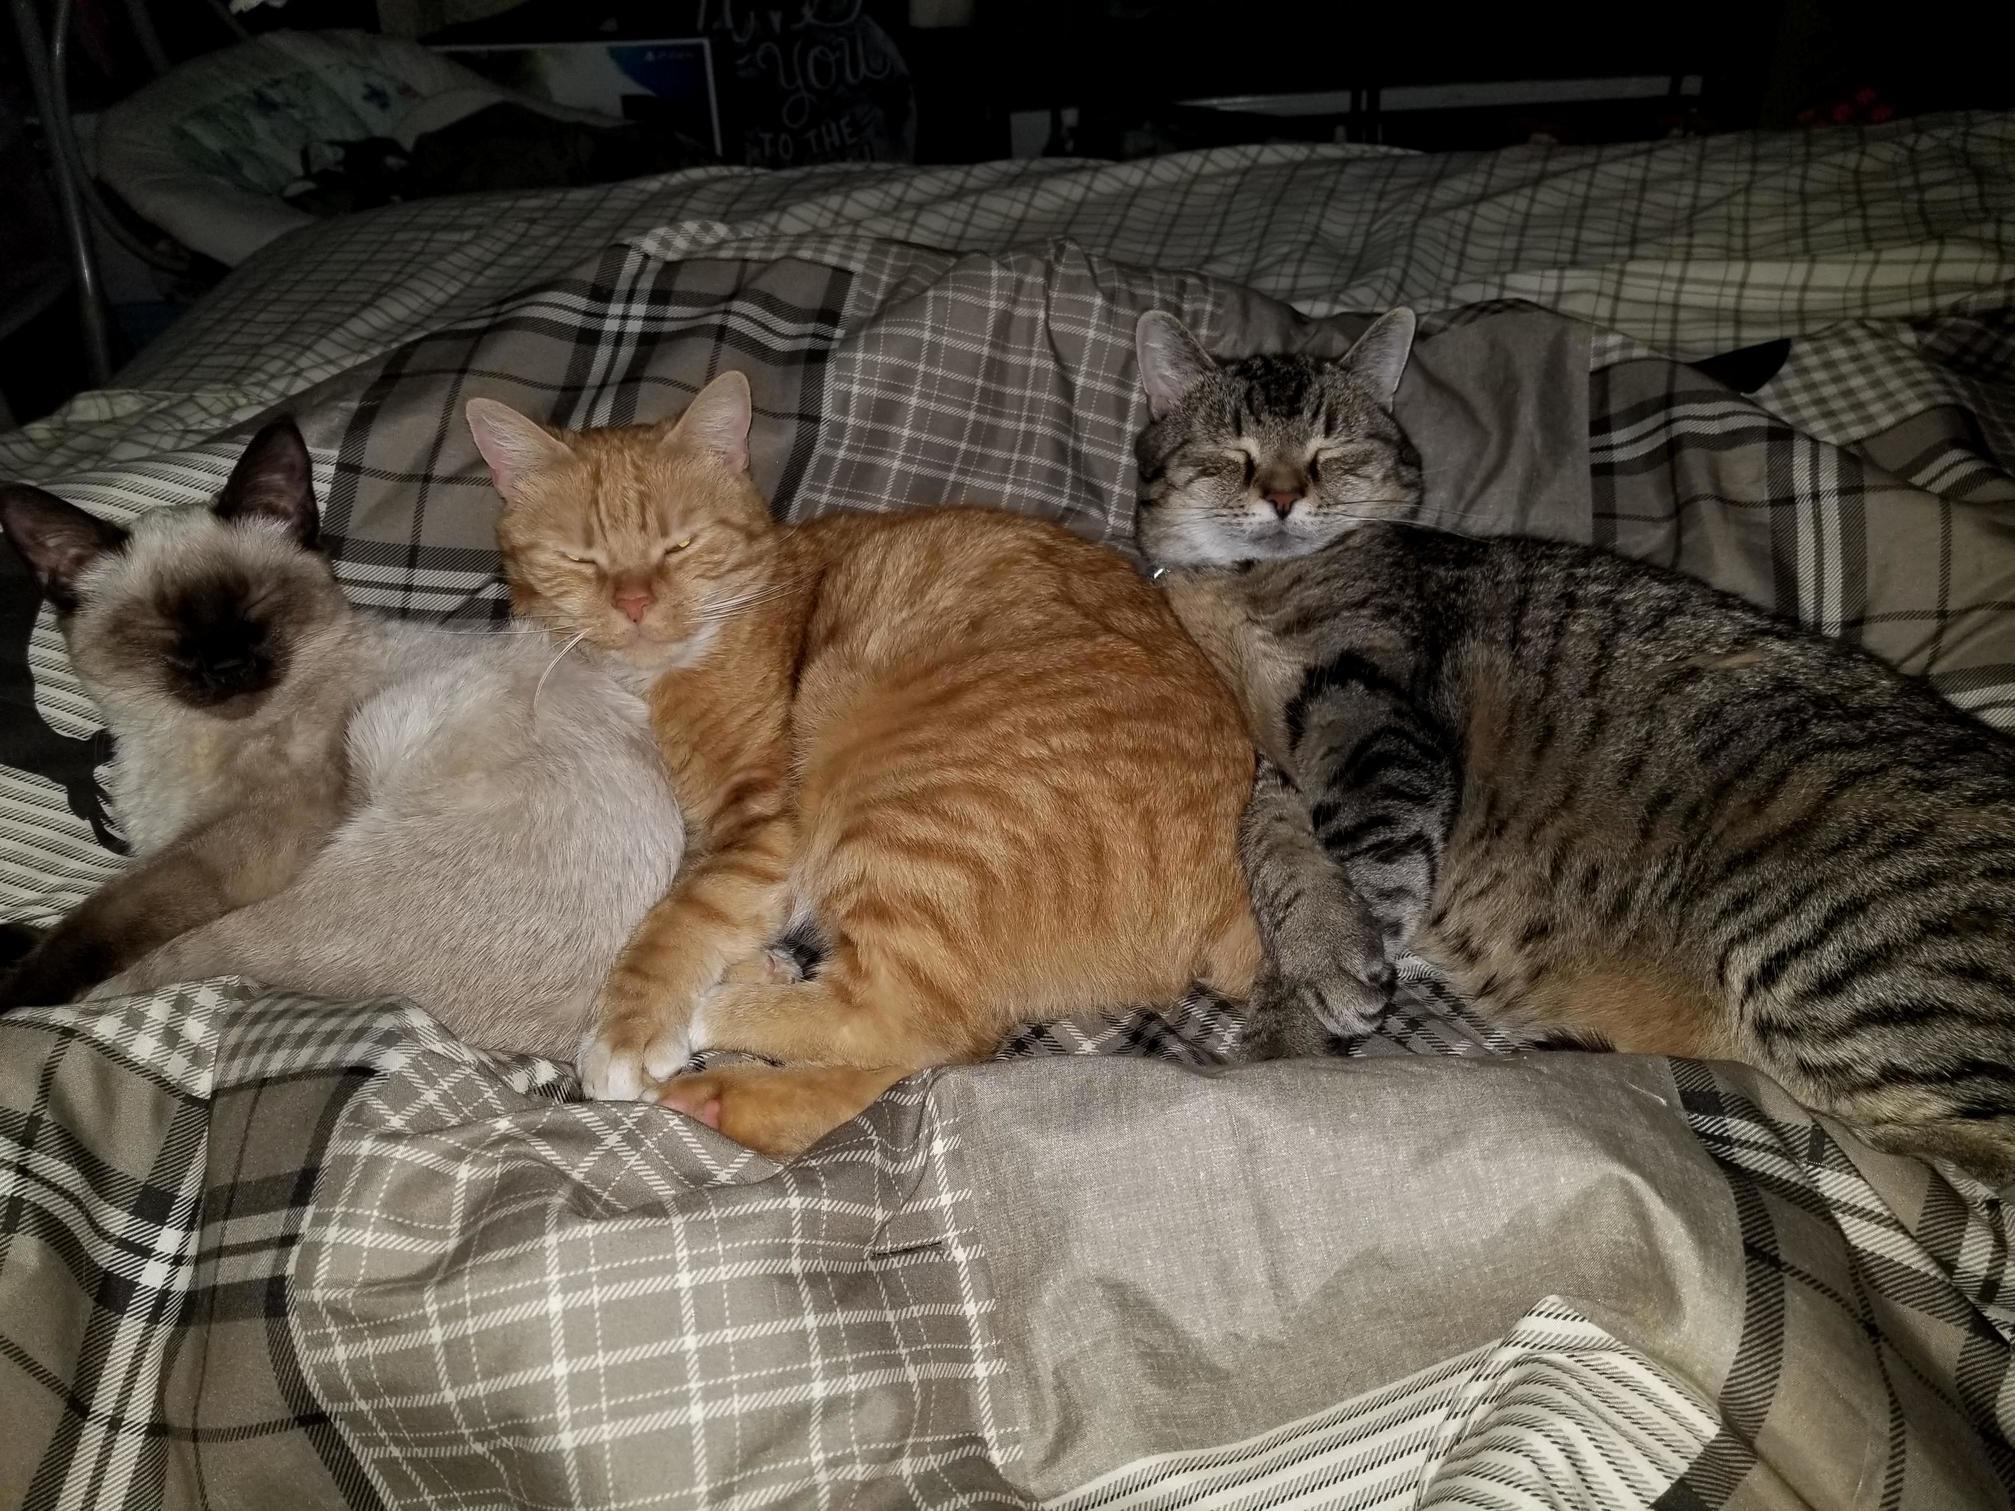 My girls decided to conga cuddle together beside me in bed today.